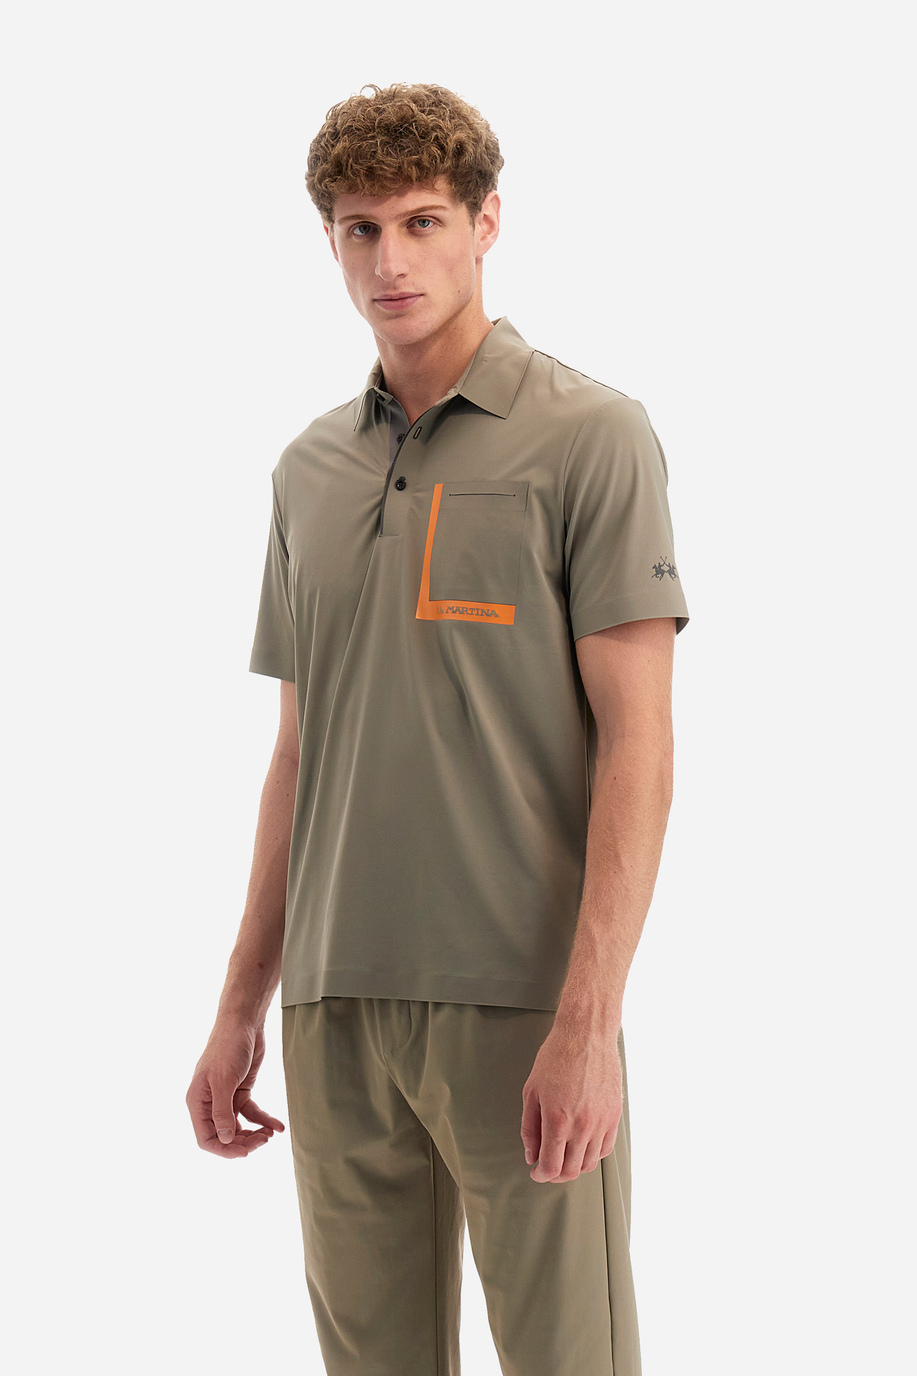 Regular-fit polo shirt in synthetic fabric - Yorik - Spring looks for him | La Martina - Official Online Shop